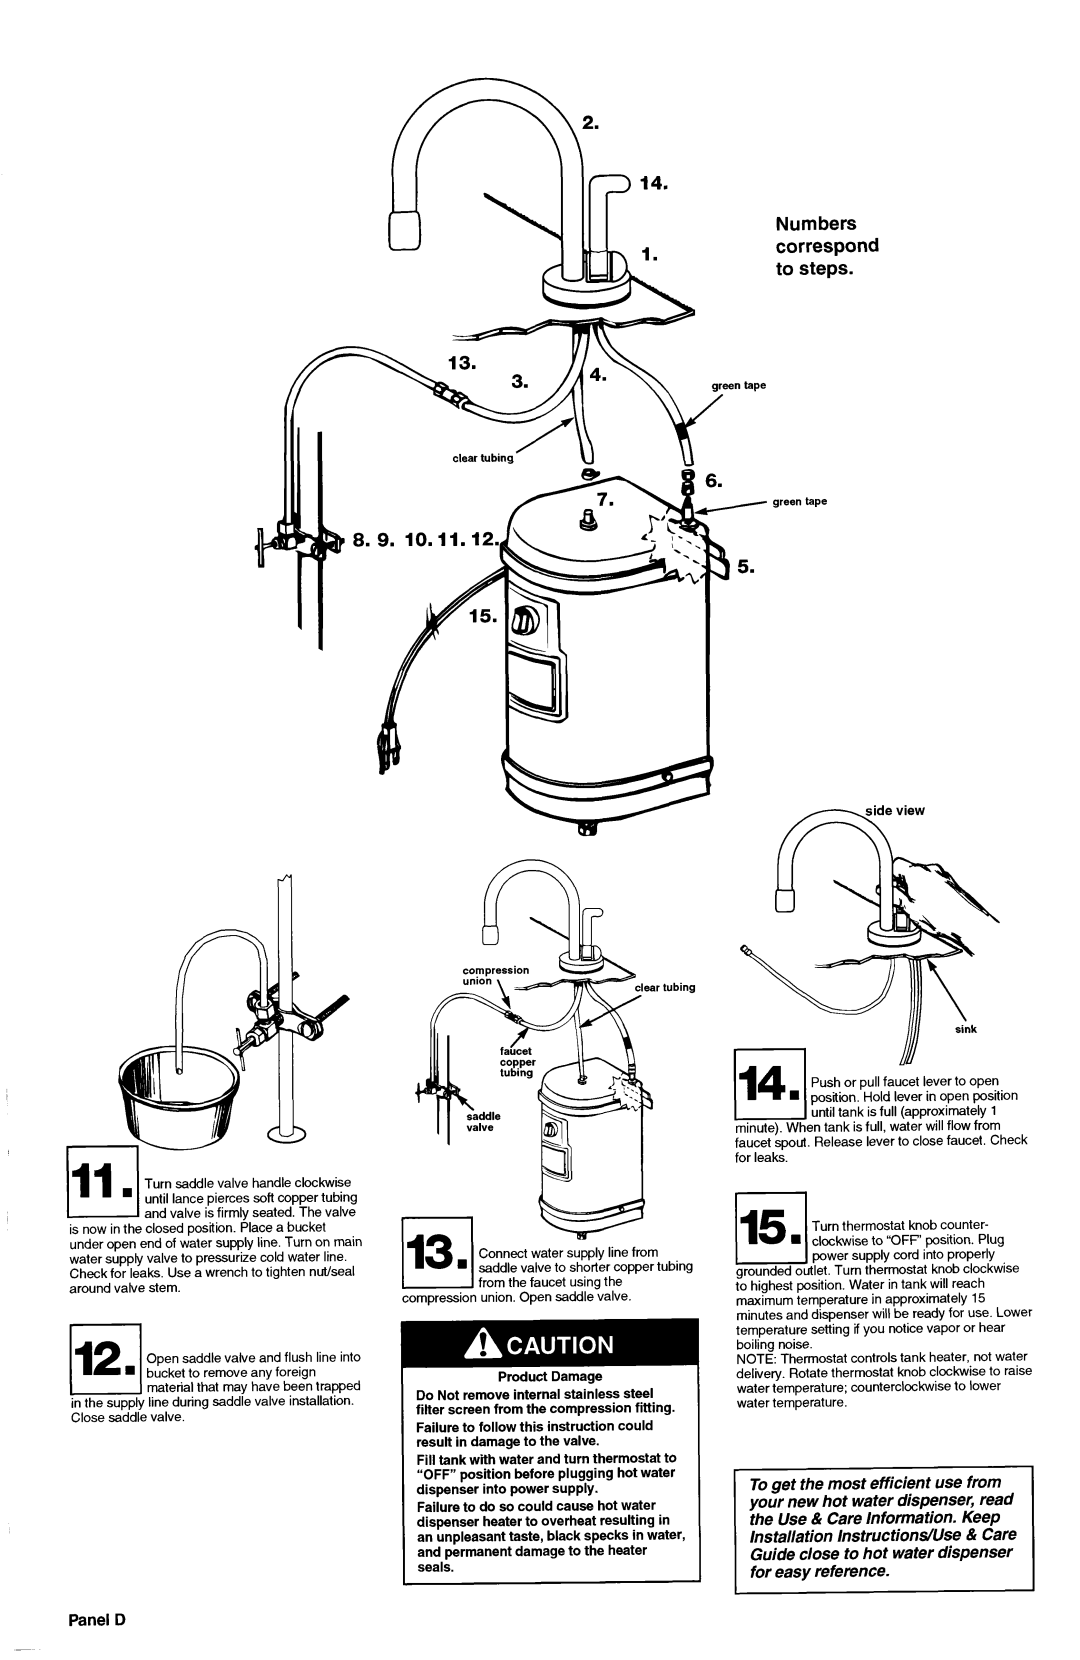 KitchenAid 3184330 installation instructions Panel D, Numbers correspond to steps 